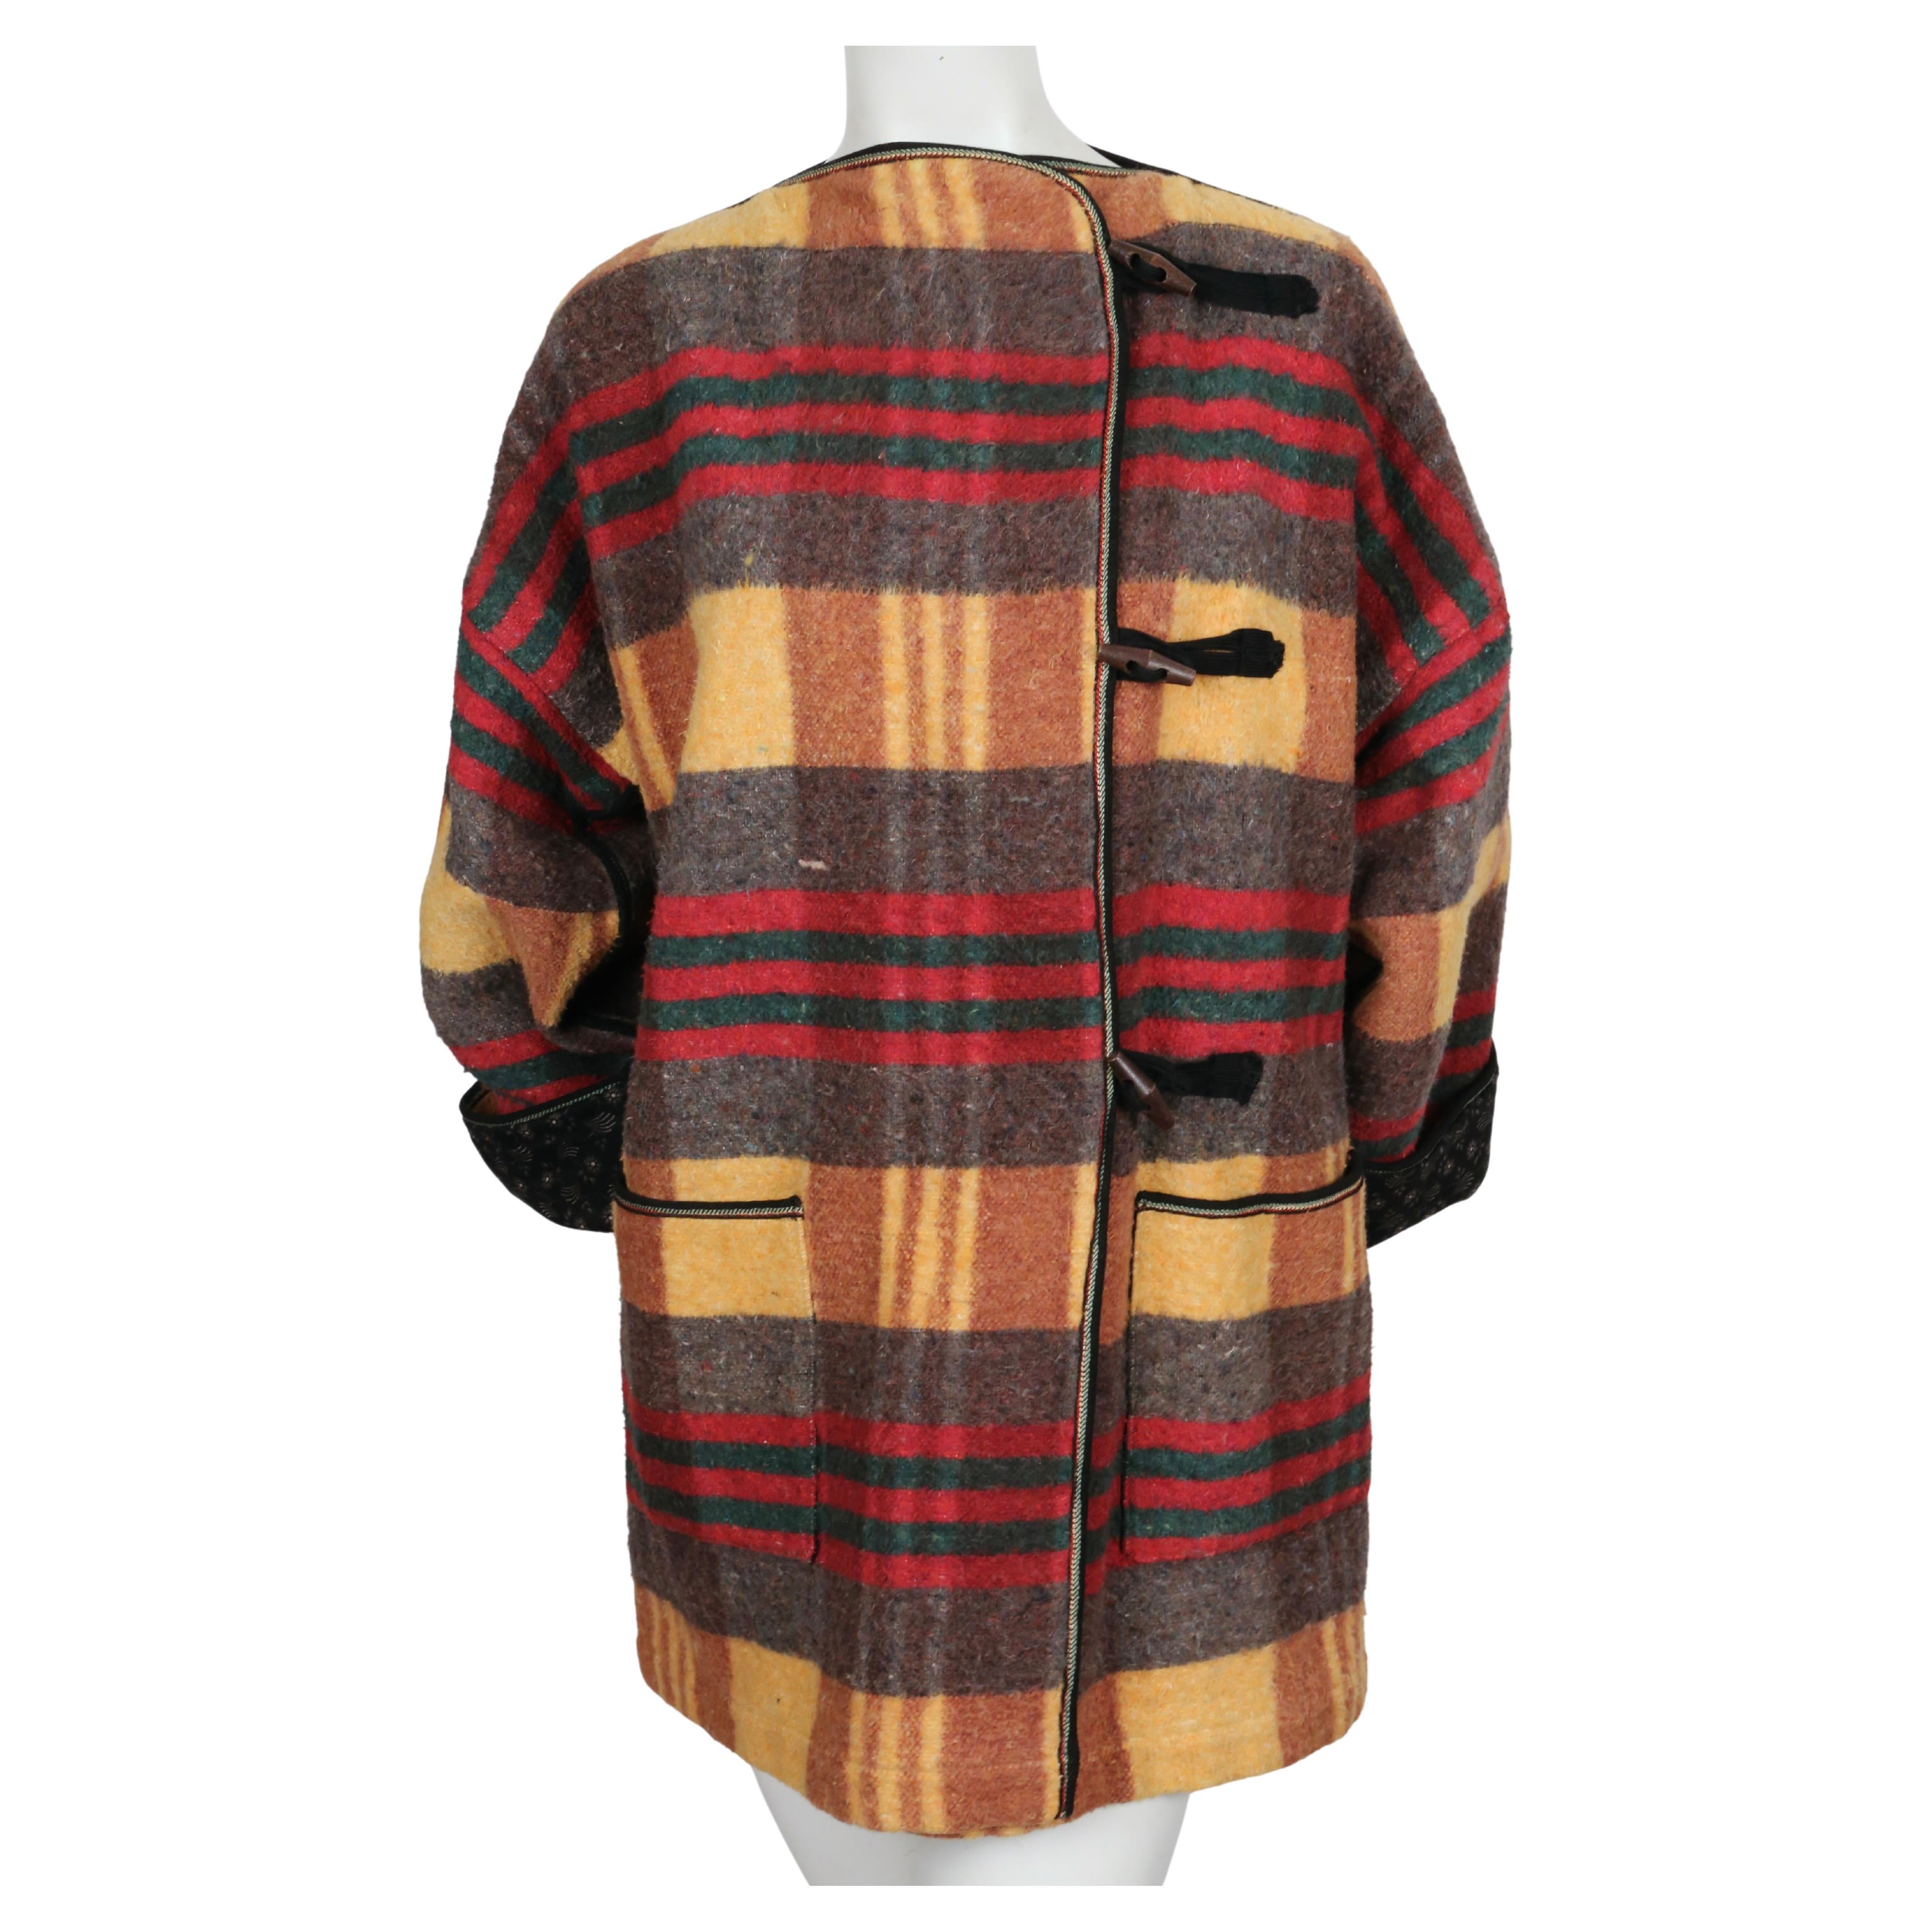 Very rare, tartan blanket jacket lined in floral calico fabric designed by Jean-Charles de Castelbajac dating to the 1970's . Very rare 